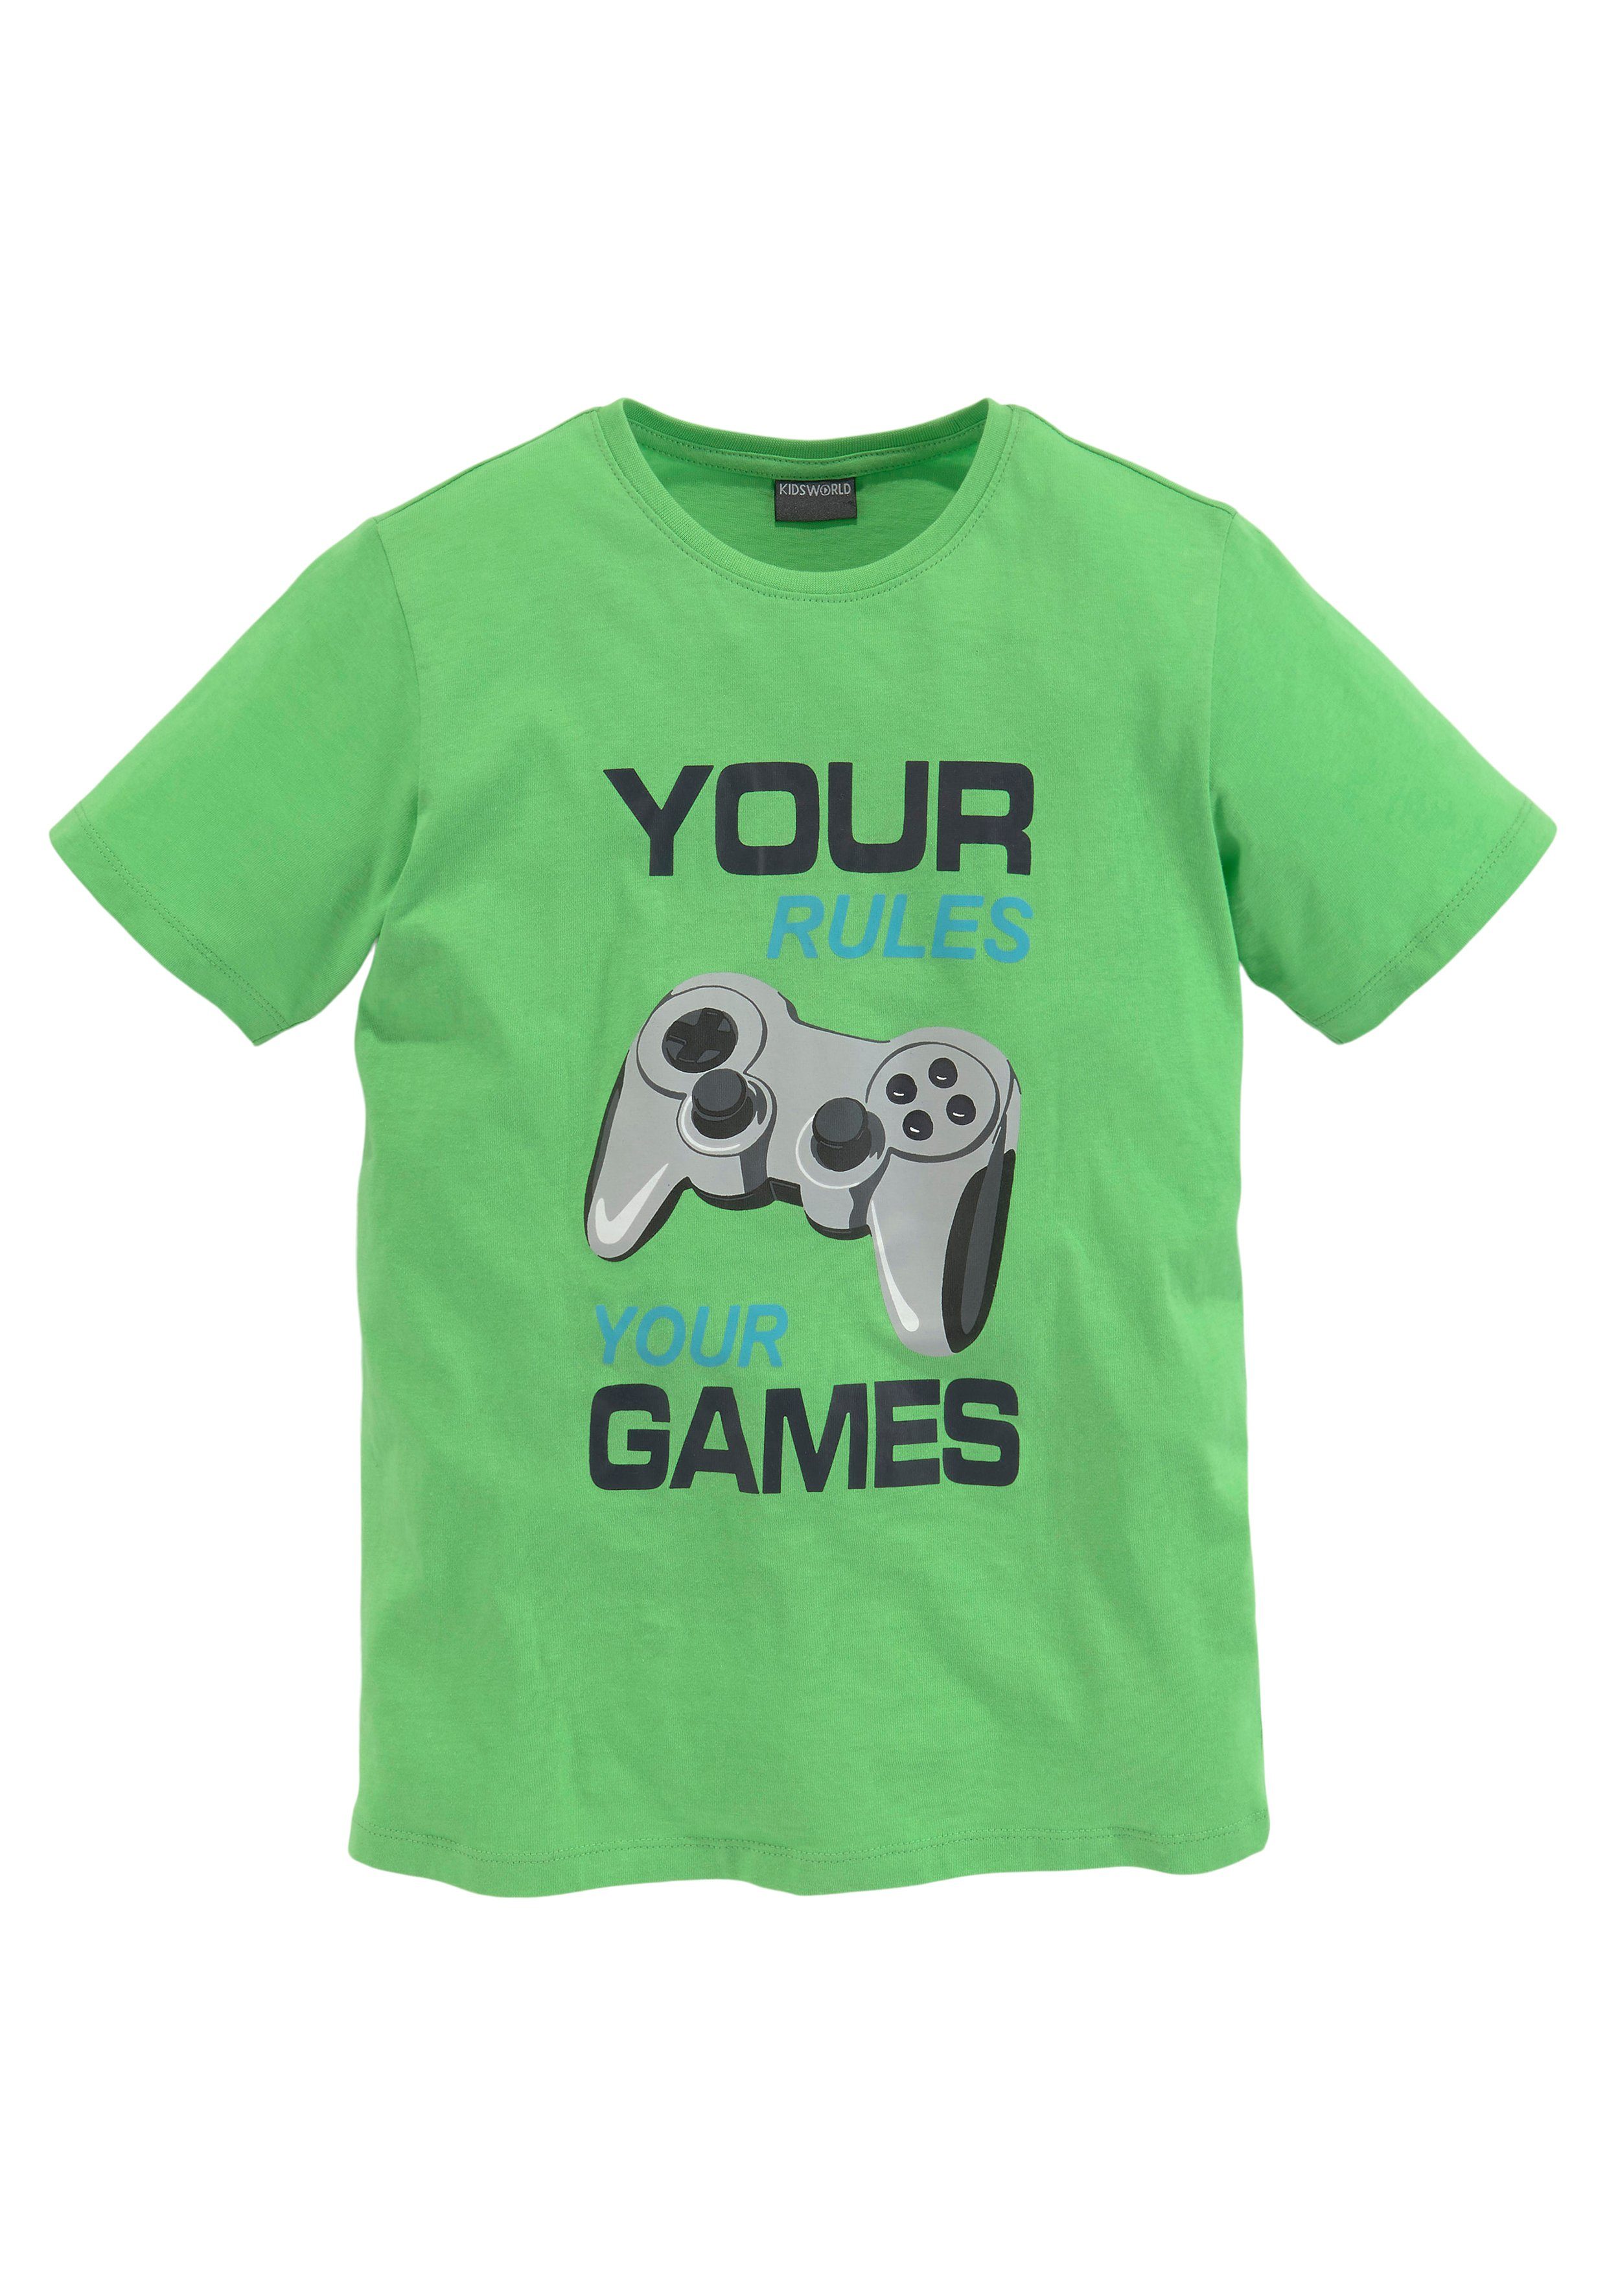 KIDSWORLD YOUR RULES GAMES T-Shirt YOUR